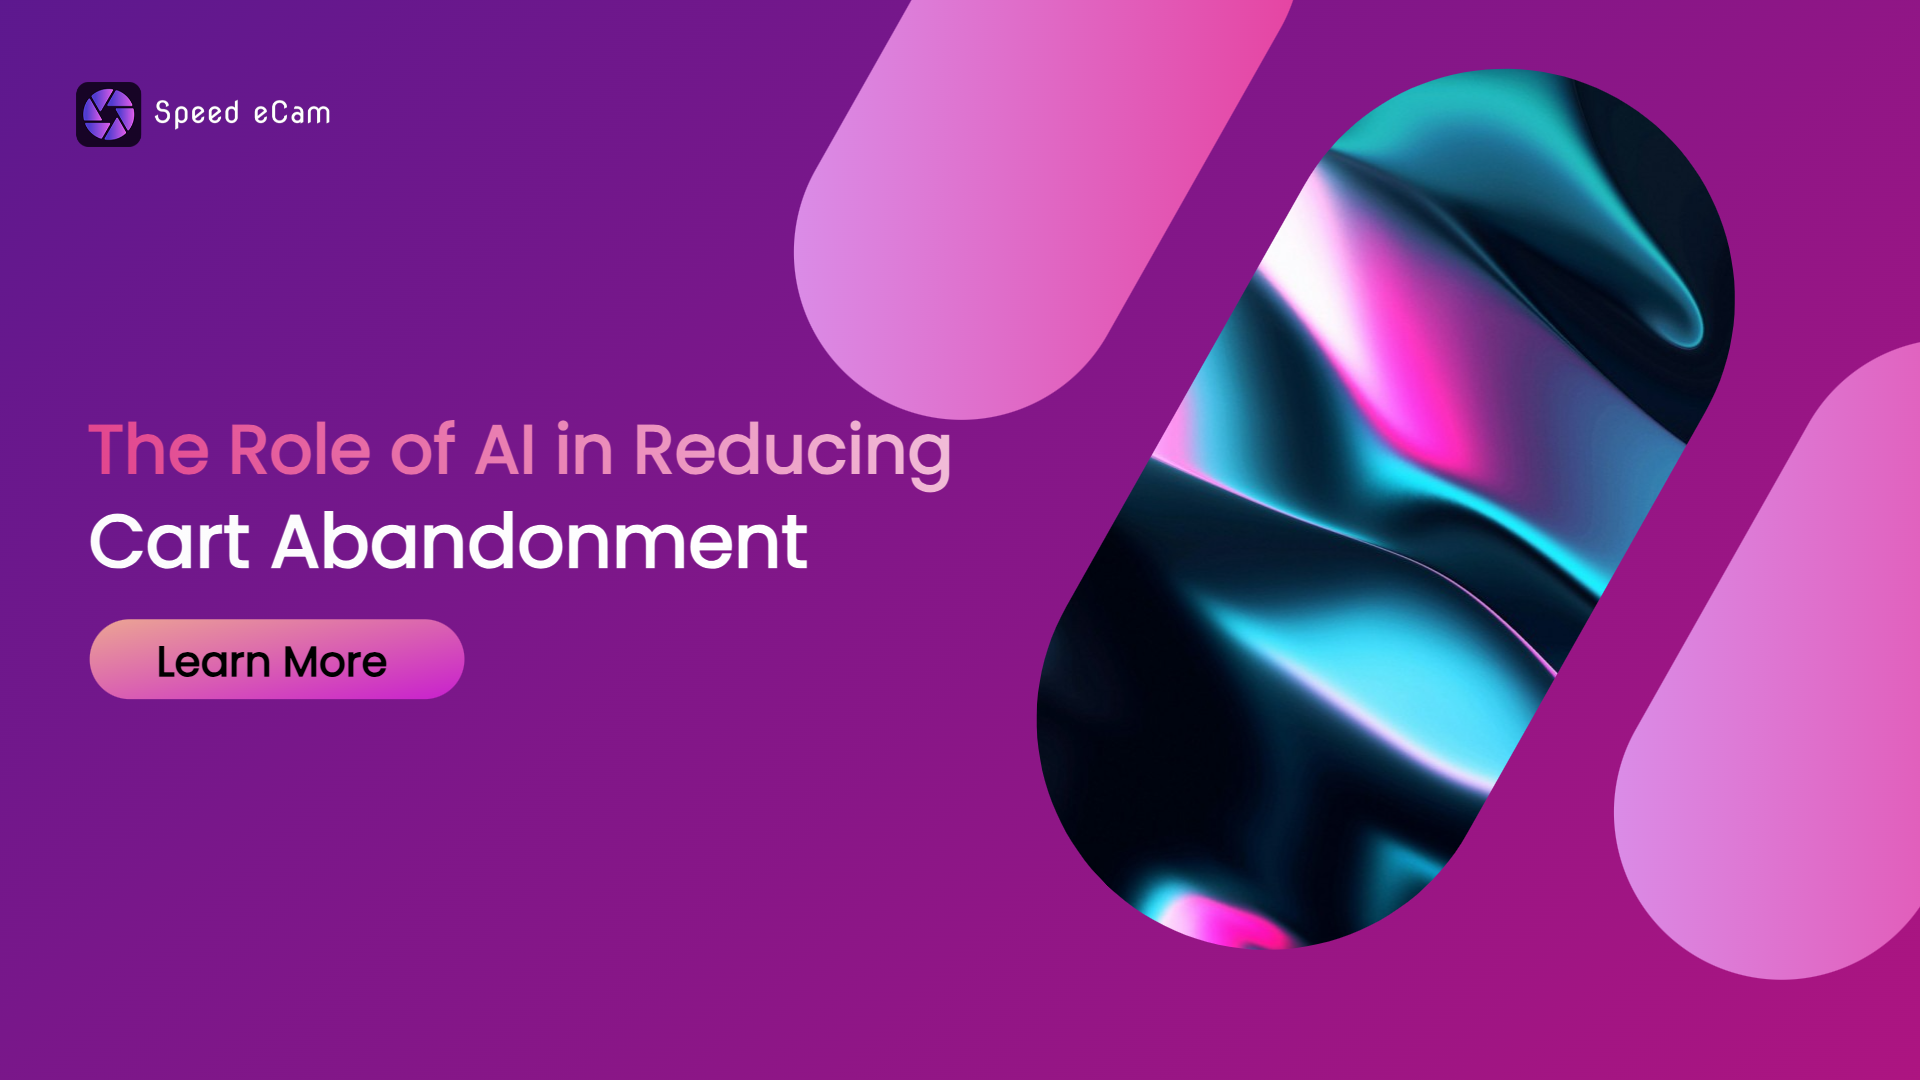 The Role of AI in Reducing Cart Abandonment